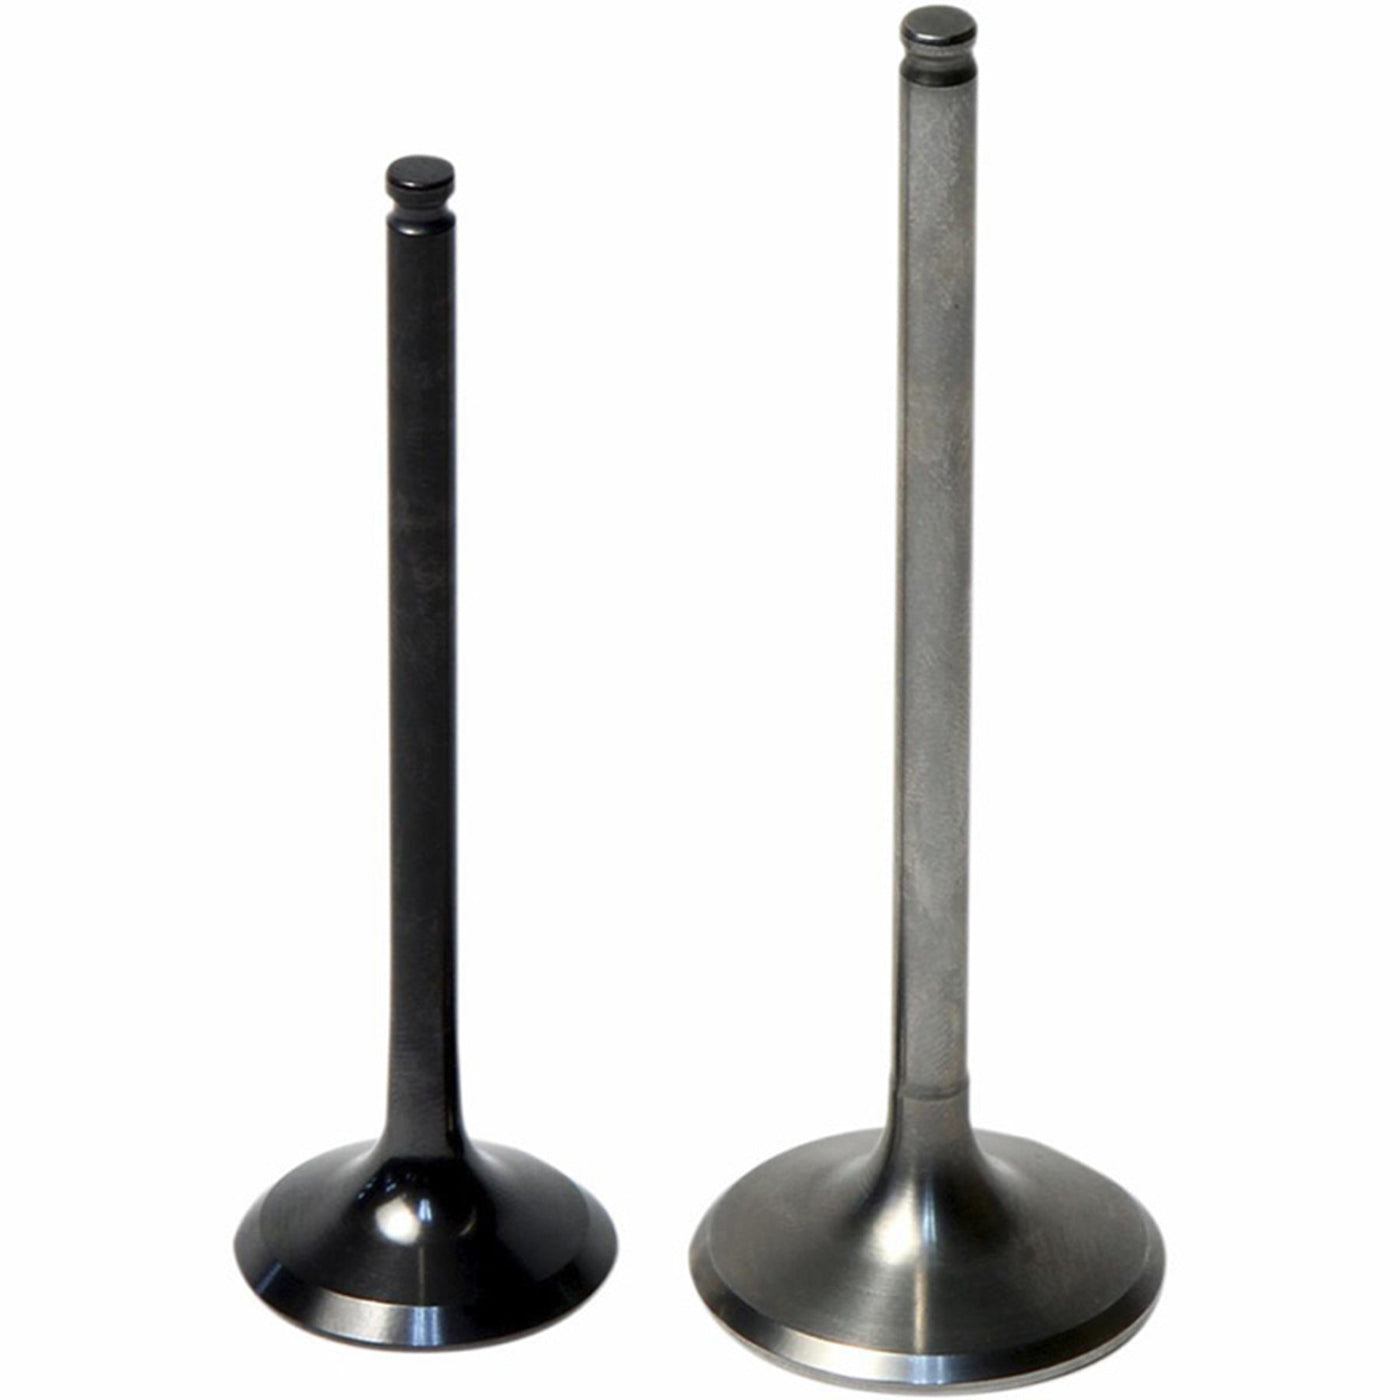 Hotcams 8400001-2 Intake and Exhaust Valves #8400001-2